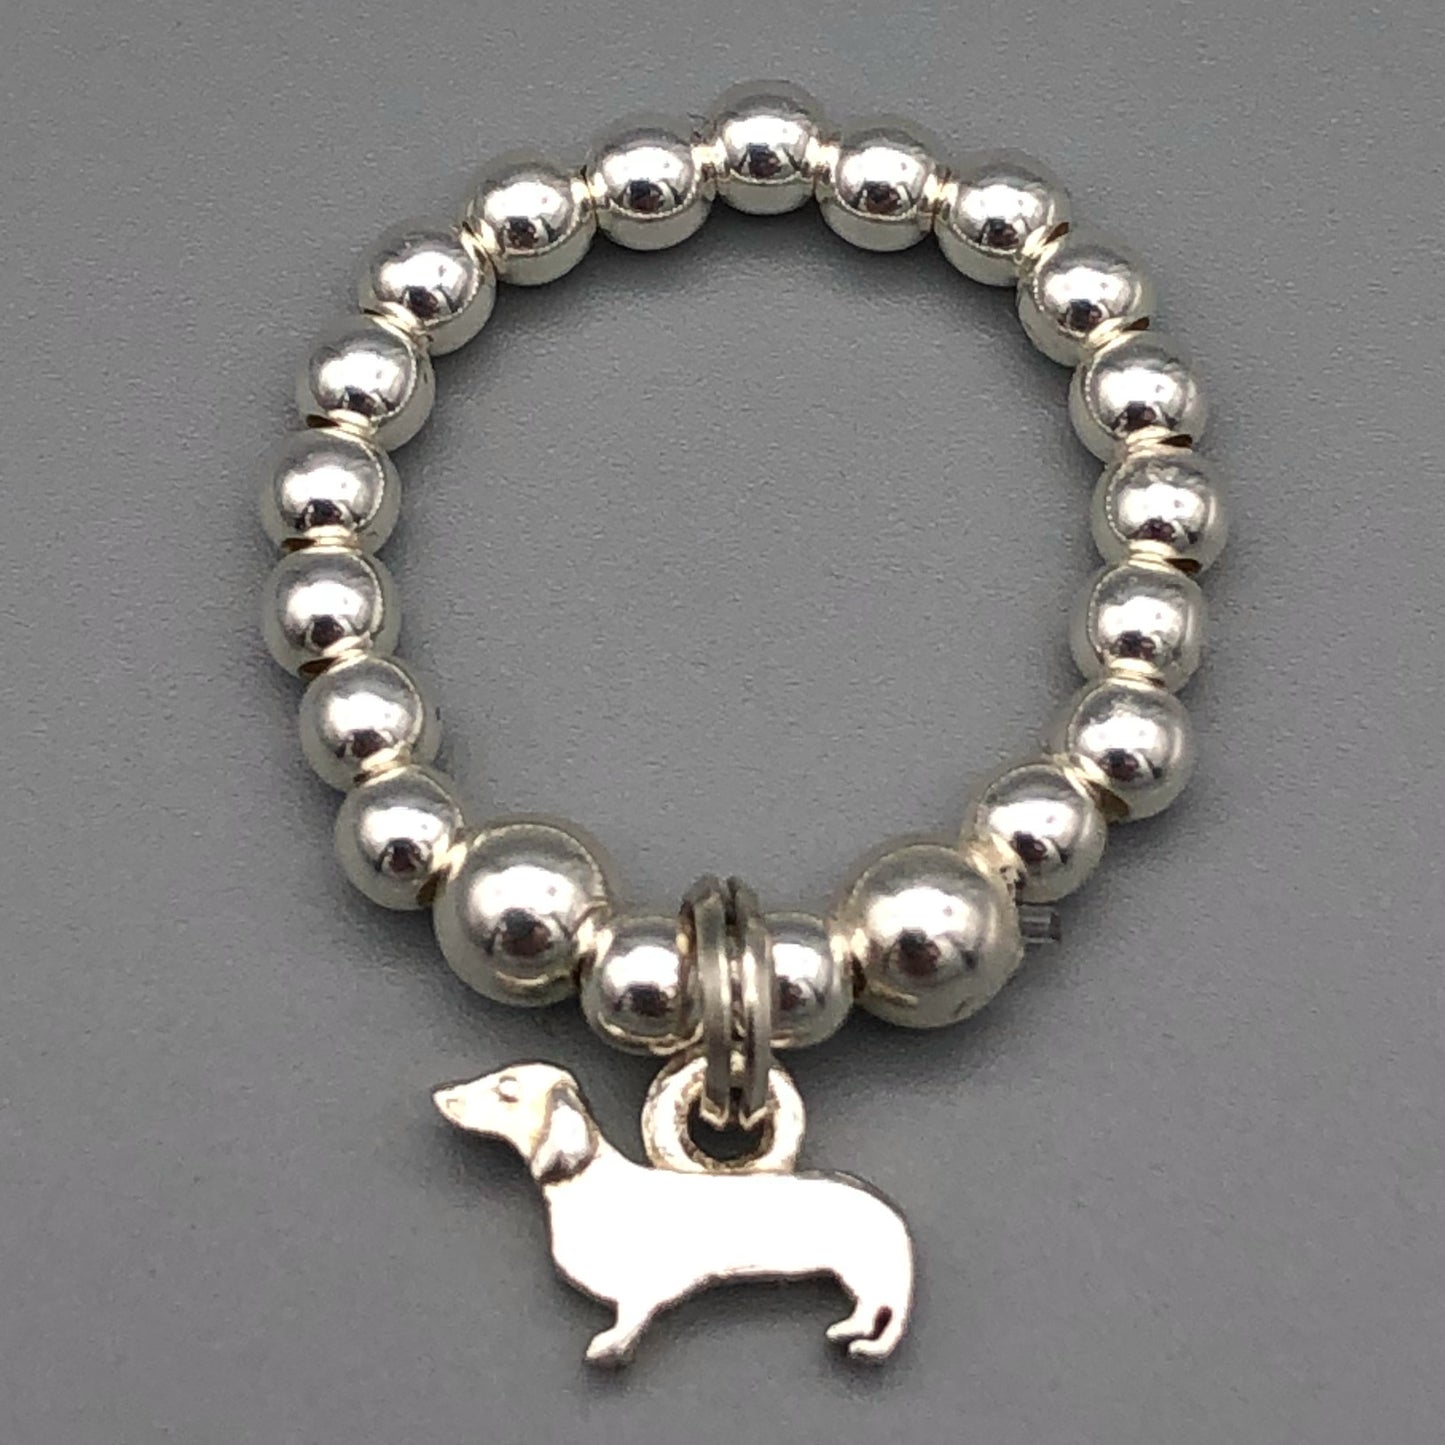 Dachshund Sausage Dog charm sterling silver women's stacking ring by My Silver Wish